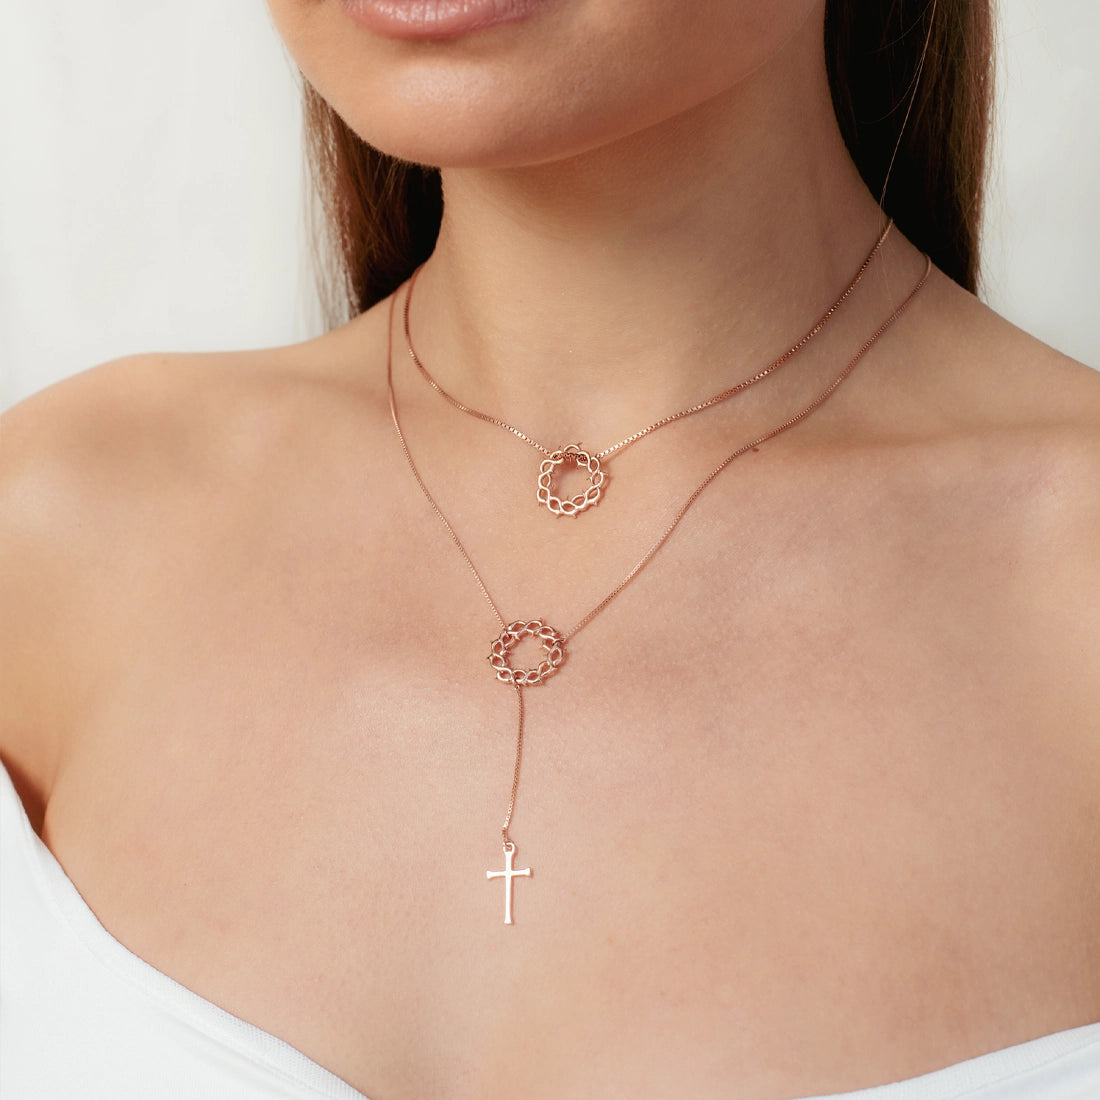 Christian woman wearing 2 rose gold vermeil necklaces with a cross pendant from the Insignia Collection by Rizen Jewelry.